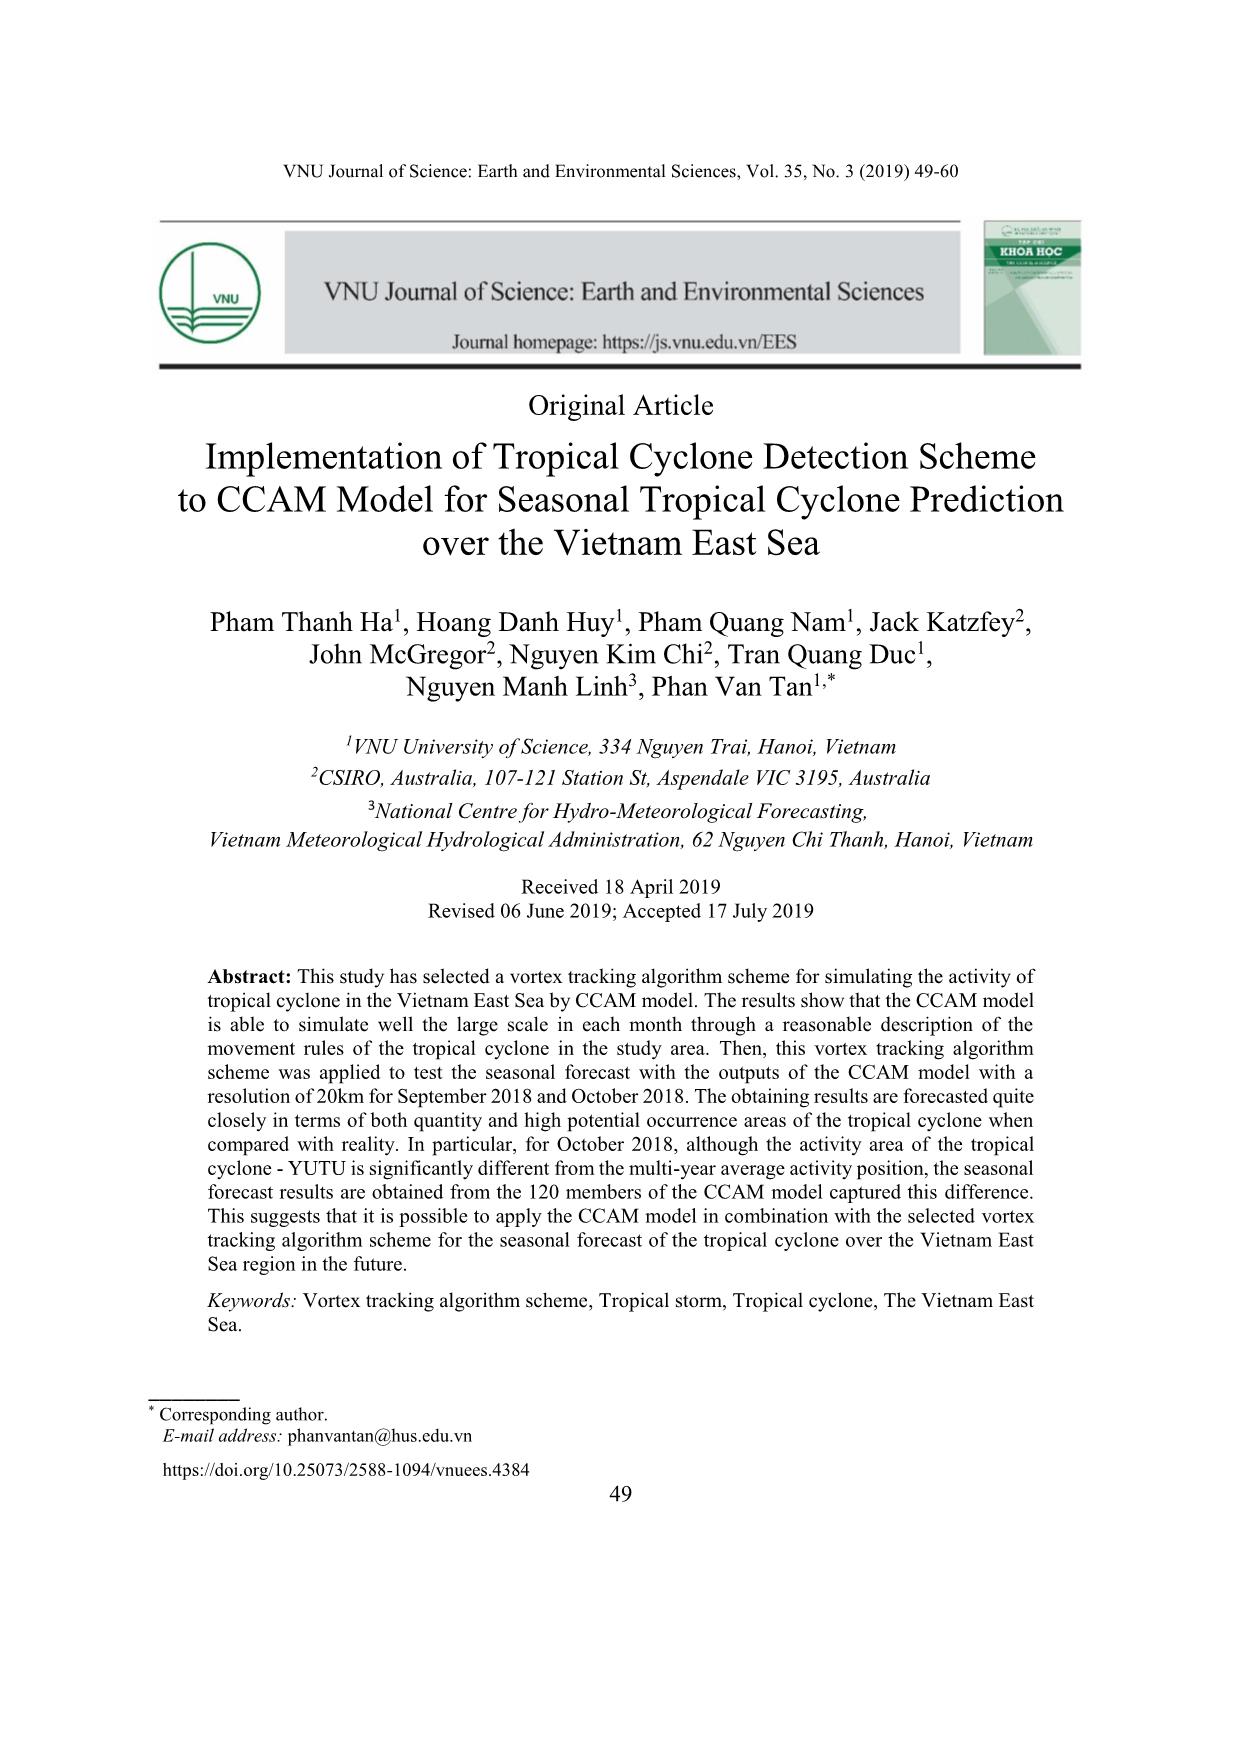 Implementation of Tropical Cyclone Detection Scheme to CCAM Model for Seasonal Tropical Cyclone Prediction over the Vietnam East Sea trang 1